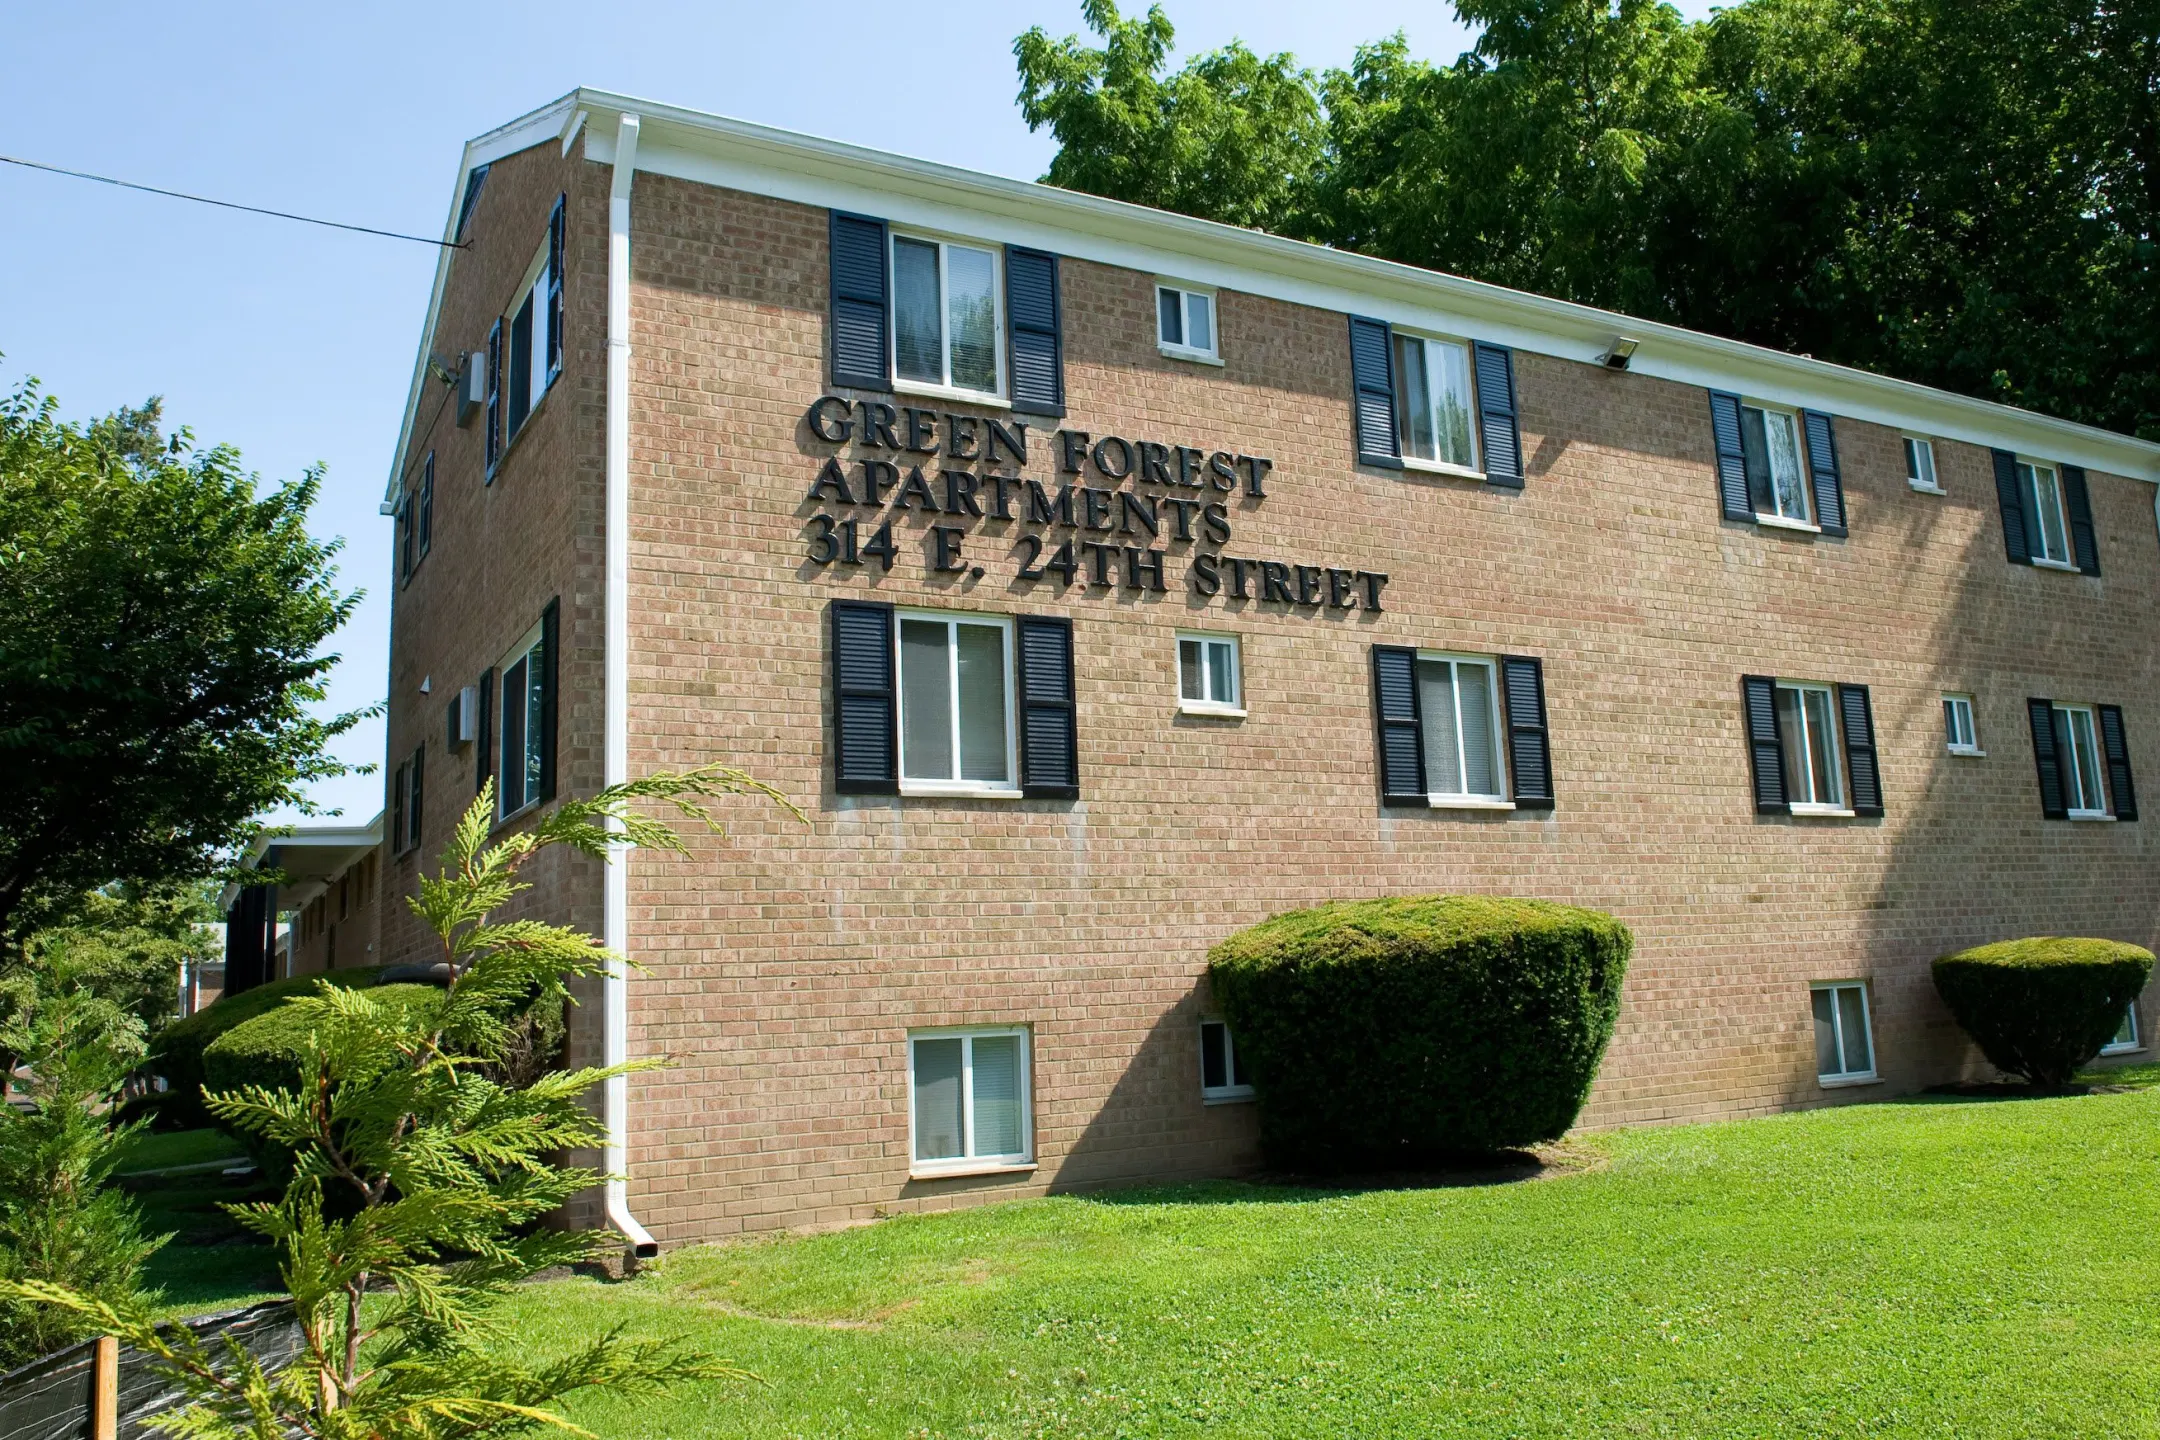 Building - Green Forest Apartments - Chester, PA